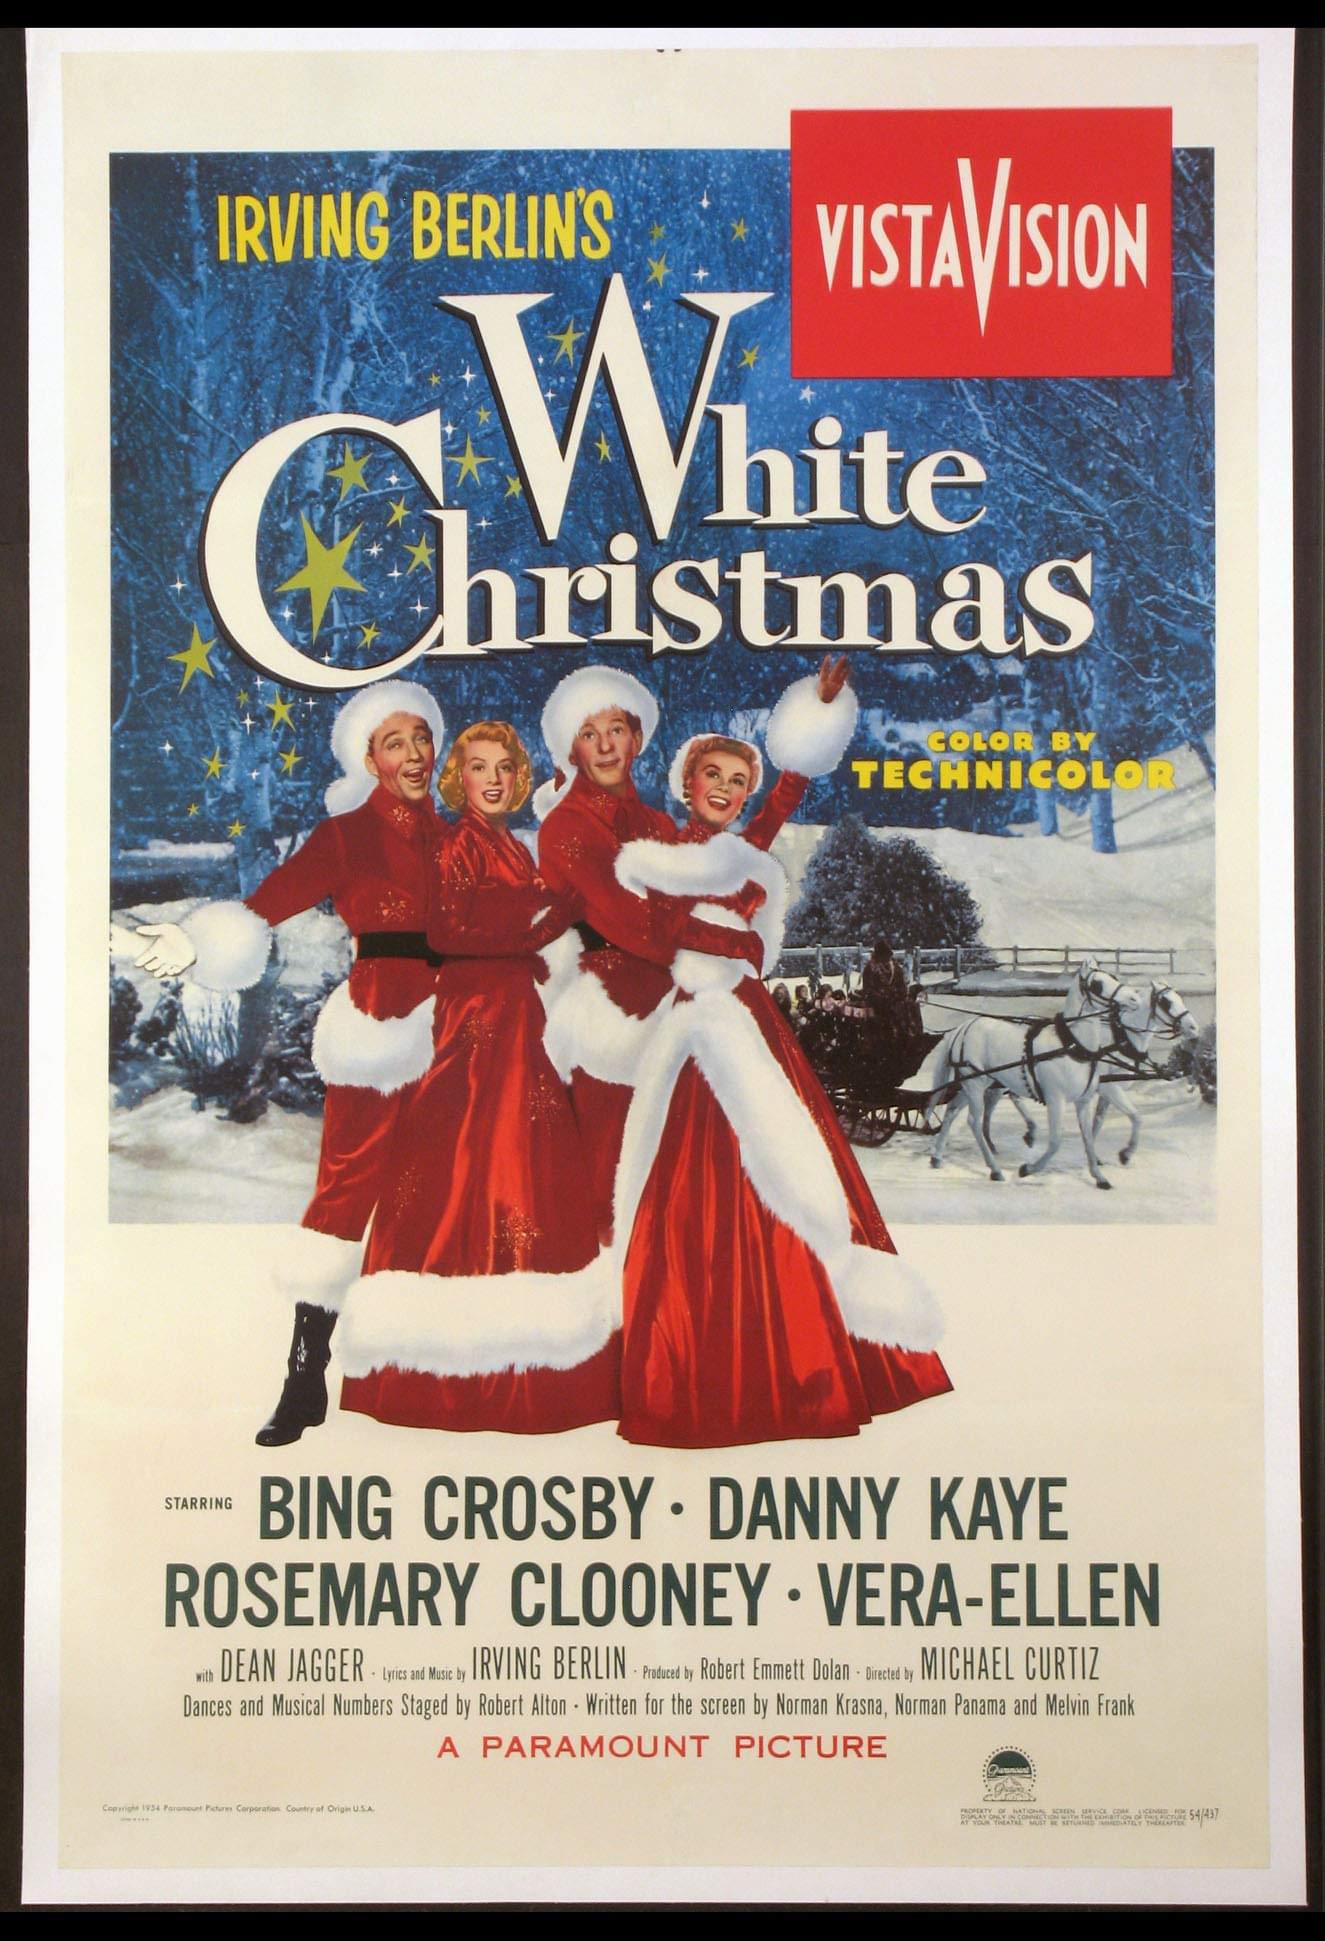 CGW Goes to White Christmas